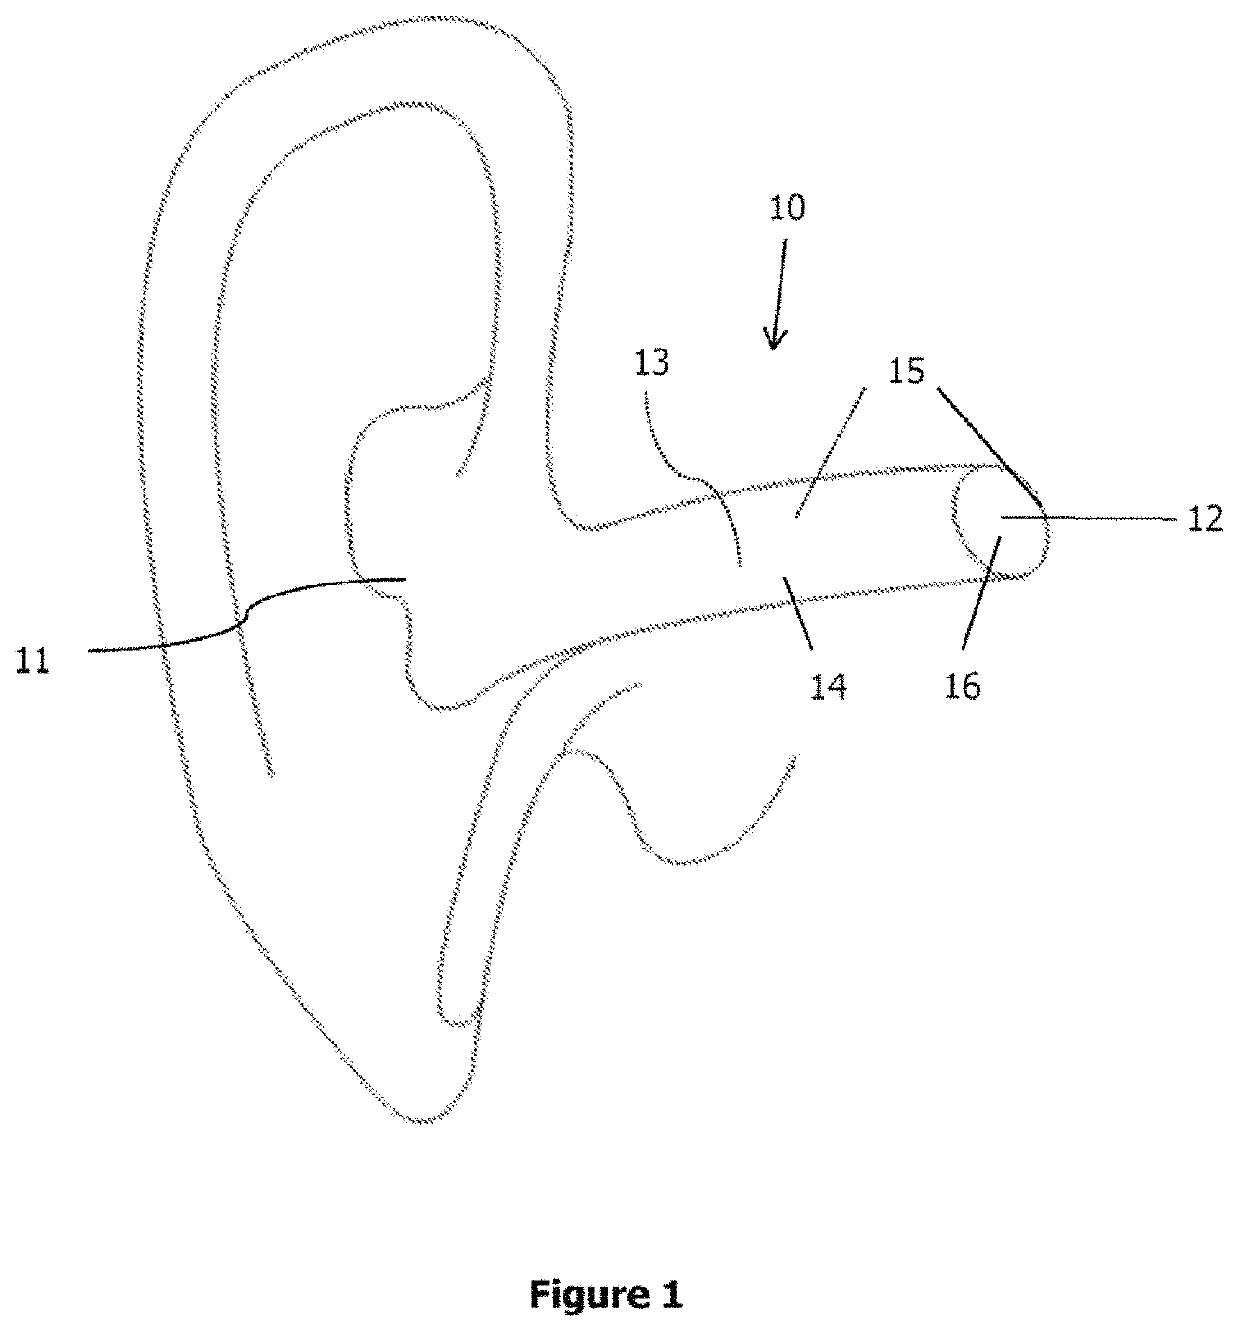 Electro-stimulation device for innervation of the external ear canal